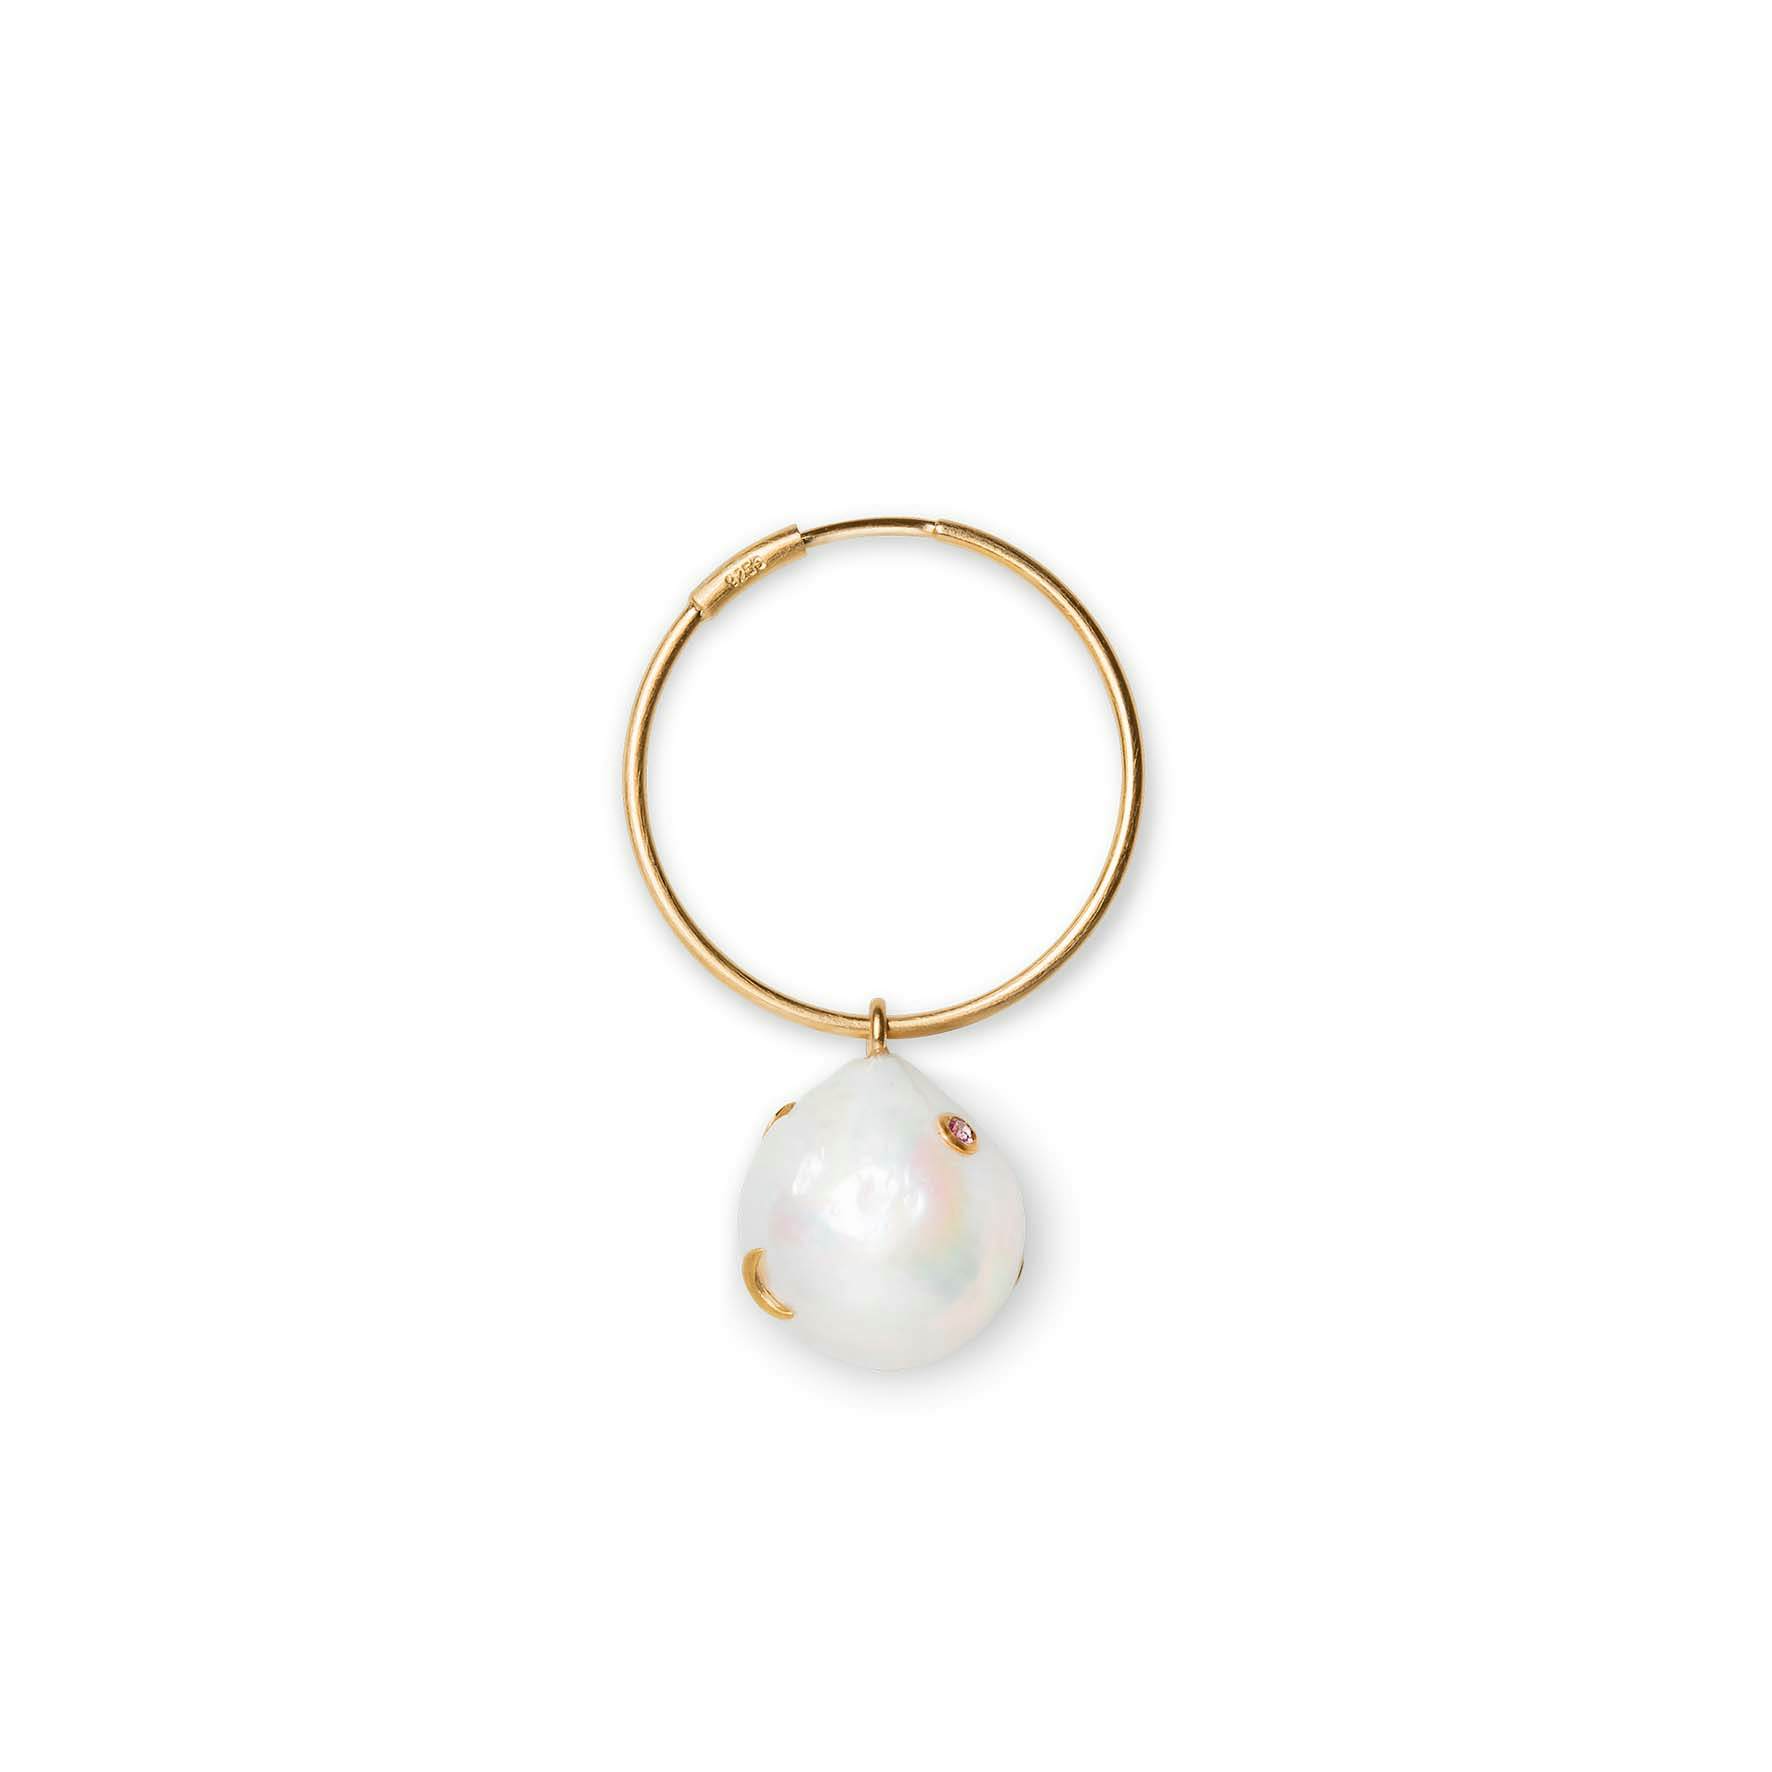 Baroque Pearl Earring from Jane Kønig in Goldplated-Silver Sterling 925